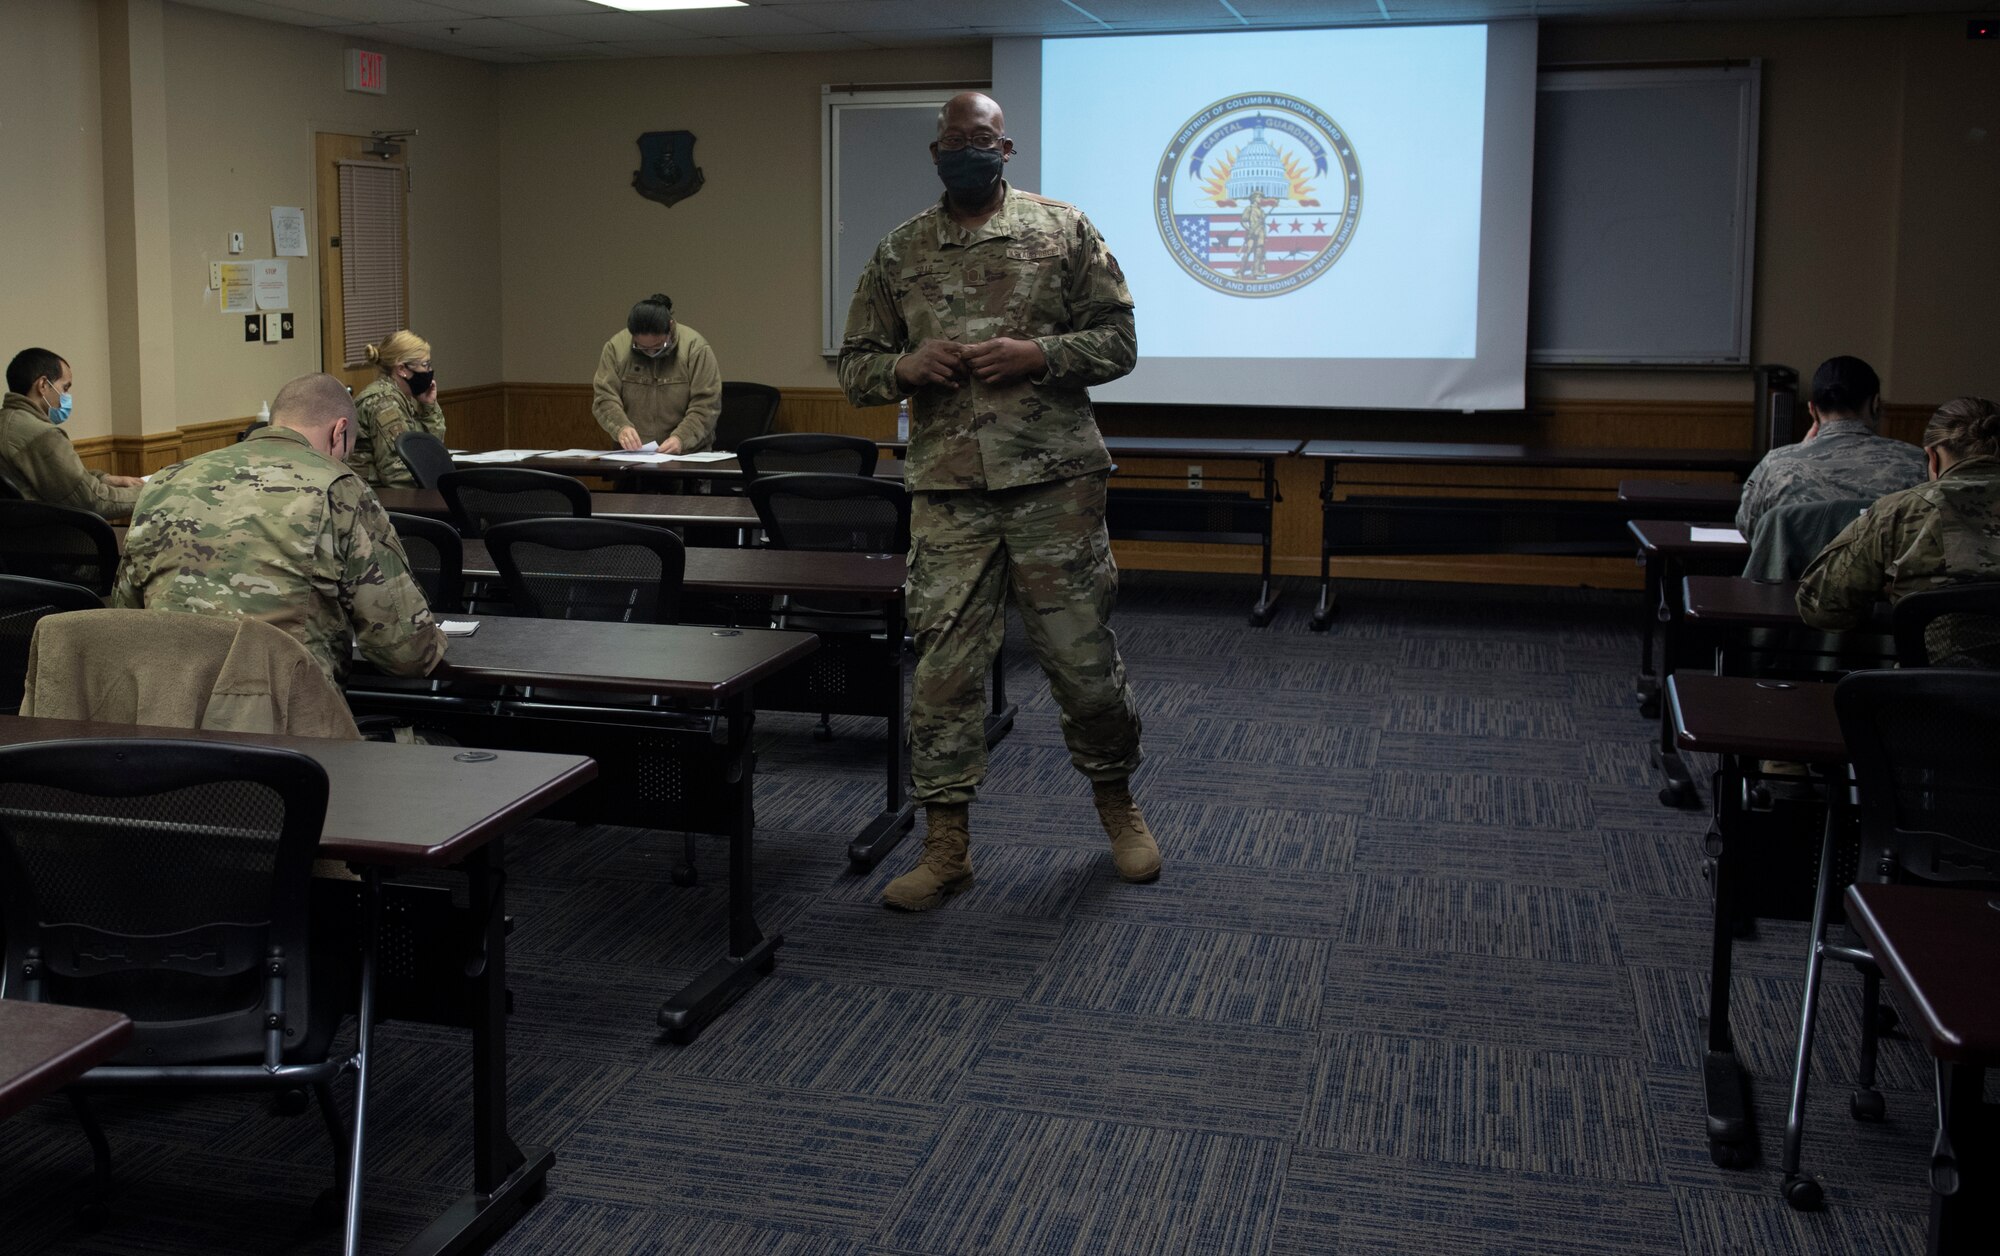 Master Sgt. Gary Sills from the 108th Wing finance office addresses Guardsmen Jan. 9, 2021, at Joint Base McGuire-Dix-Lakehurst, N.J., prior to their departure to the National Capital Region. National Guard Soldiers and Airmen from several states have traveled to the NCR to provide civil disturbance support to federal and district authorities.